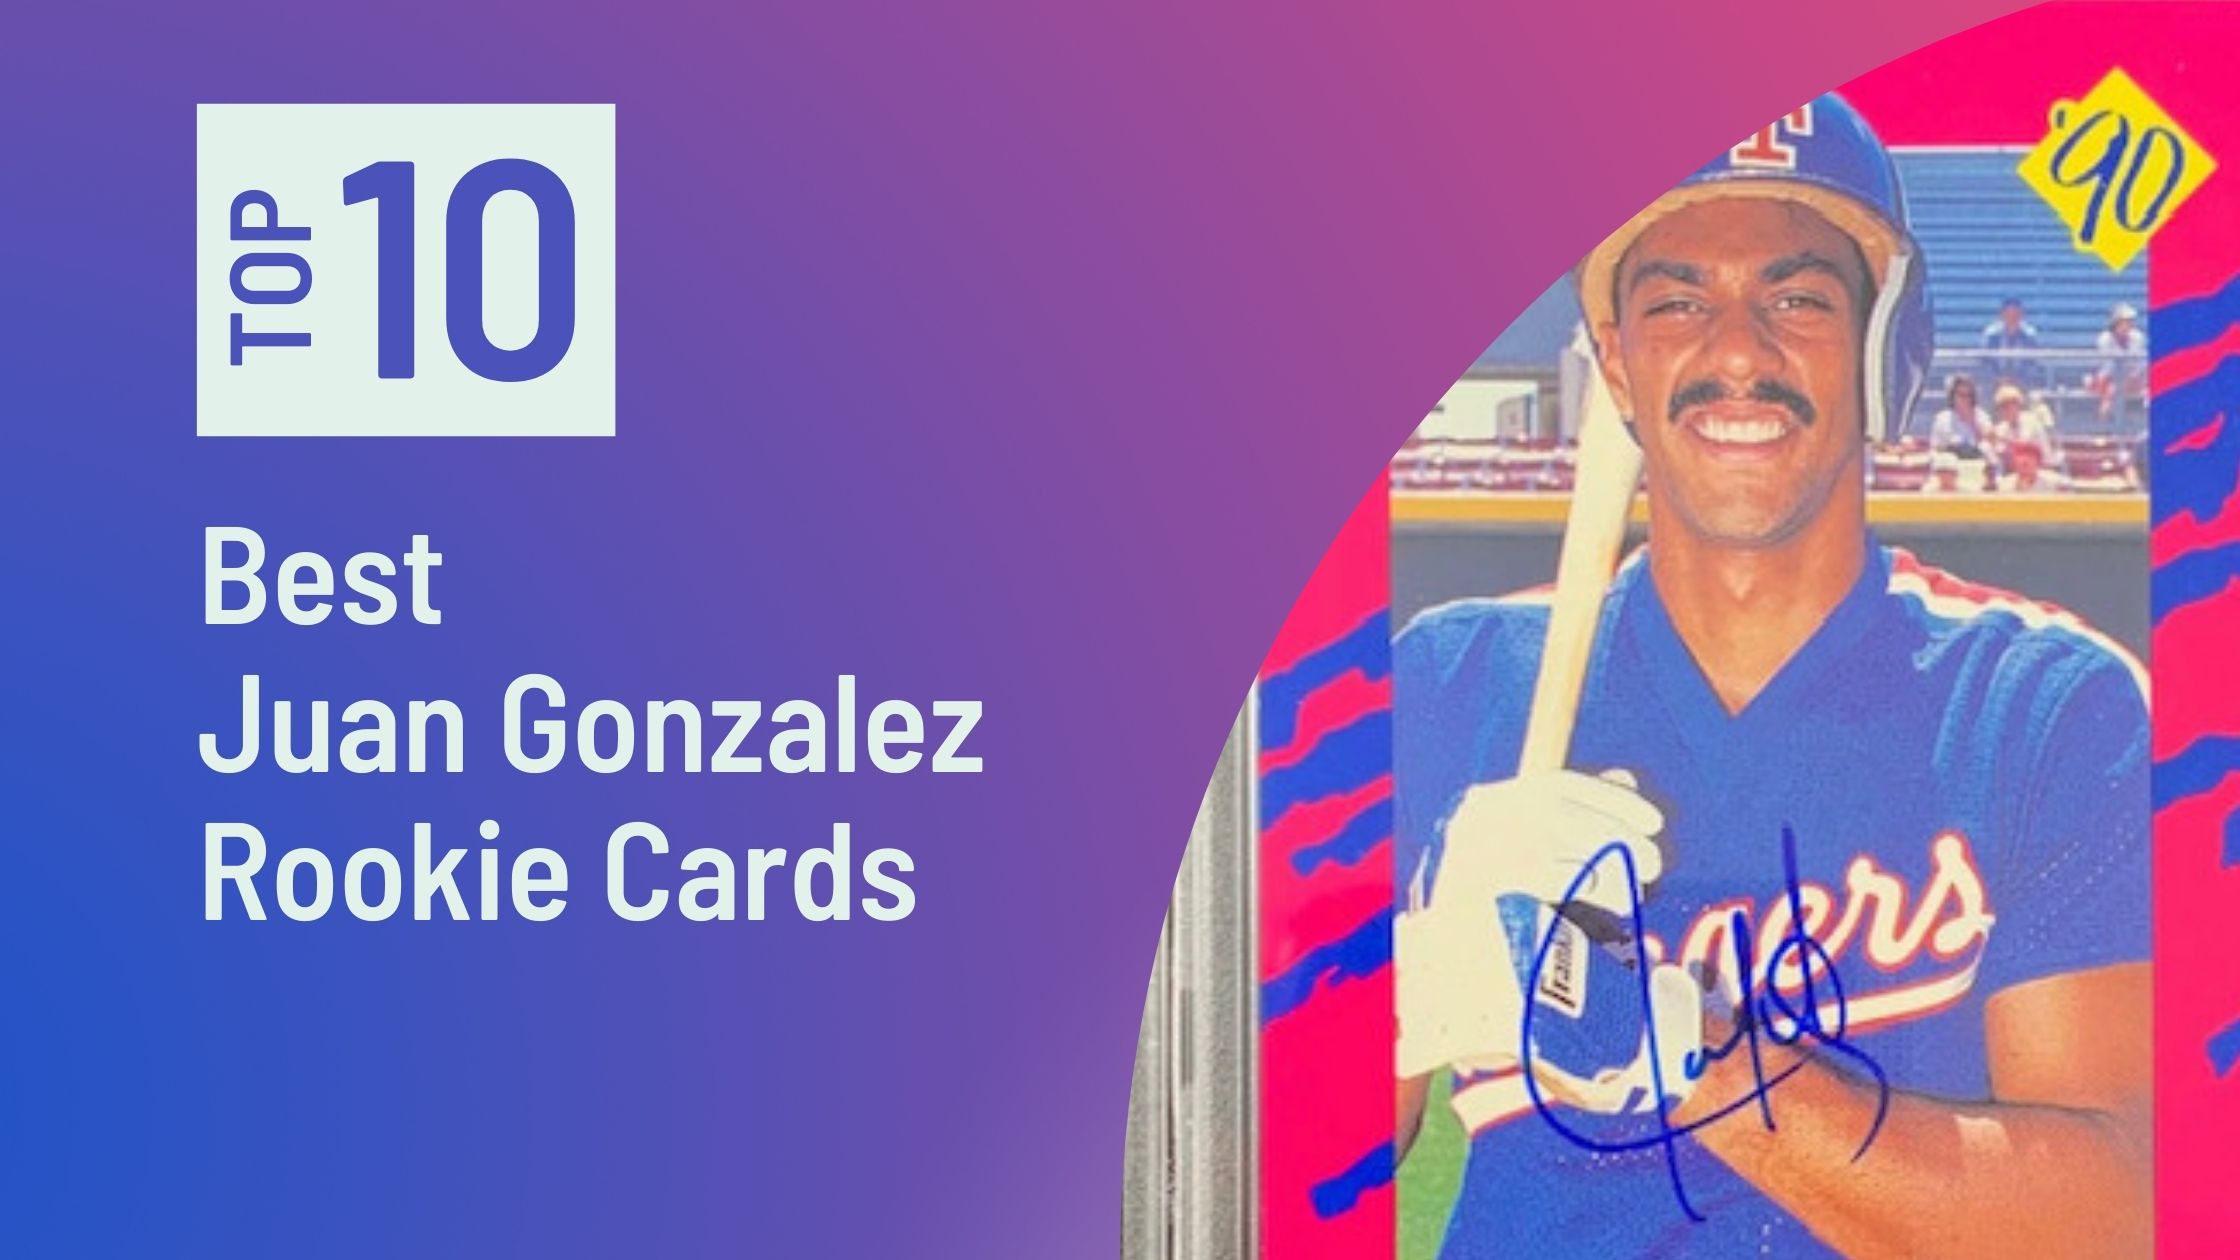 Featured image for the Best Juan Gonzalez Rookie Cards blog post on Sports Card Sharks